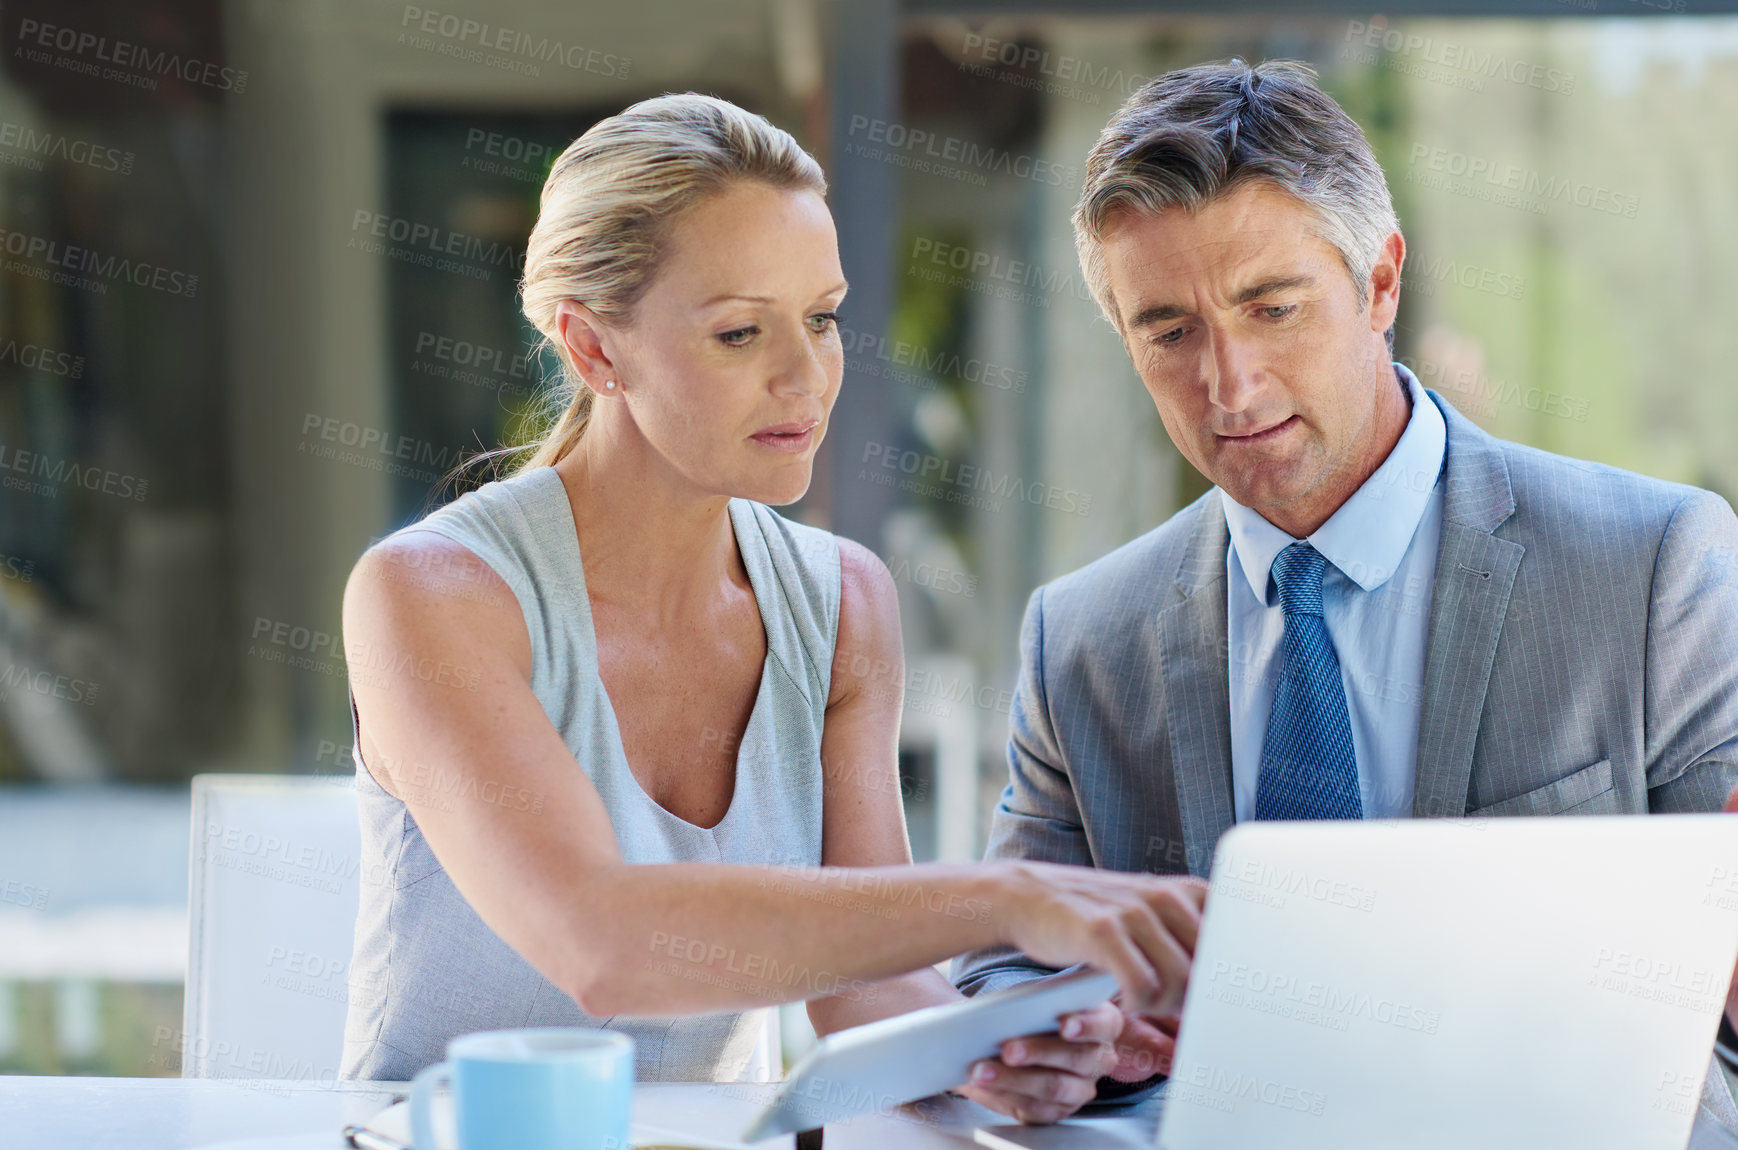 Buy stock photo Shot of two mature businesspeople working on a laptop